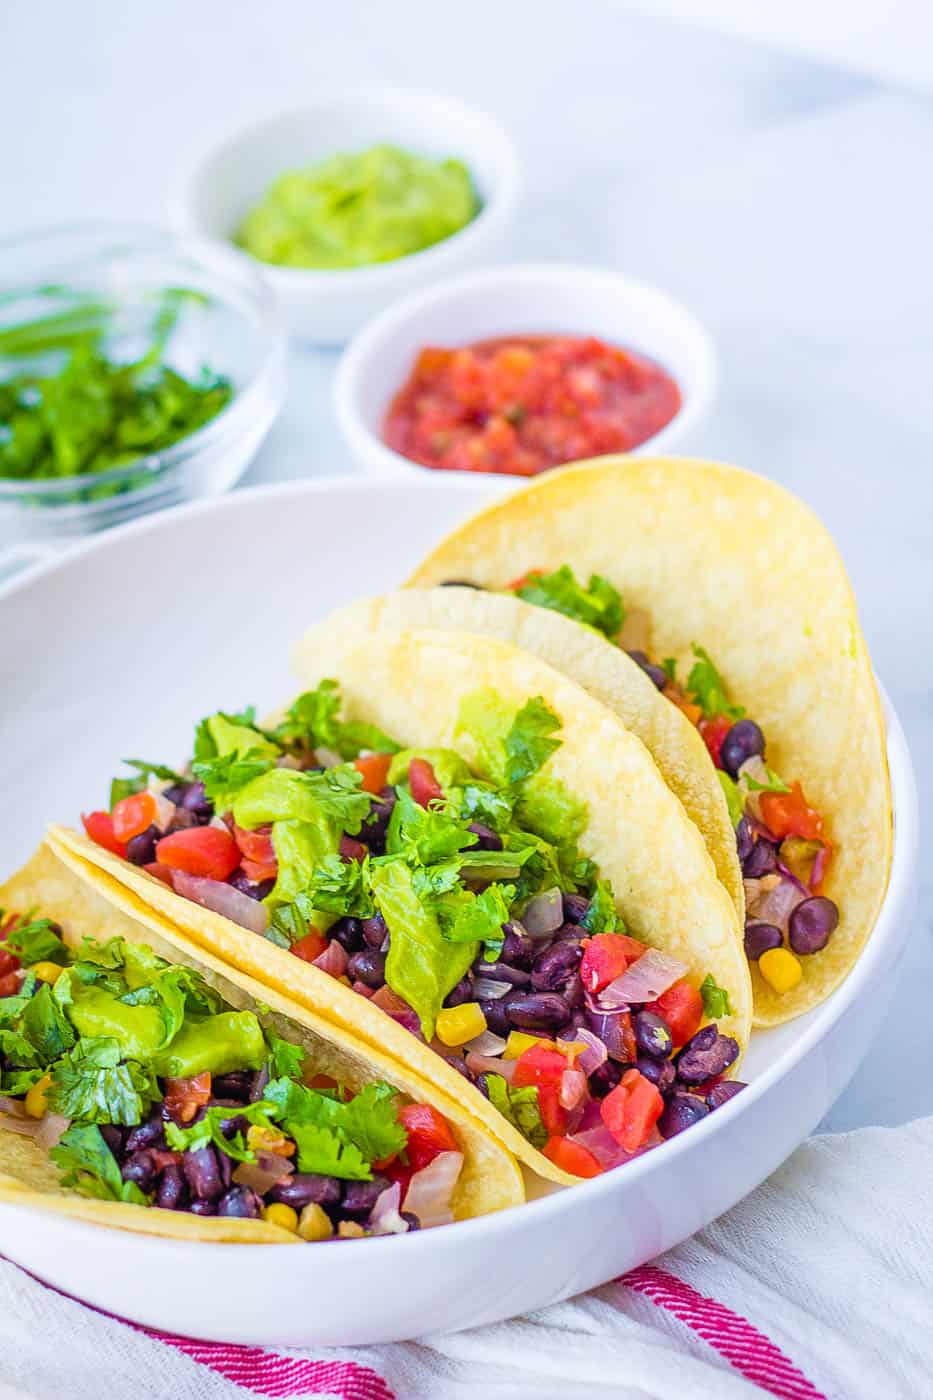 vegan tacos with black beans, avocado, veggies, and cilantro, served on a white plate